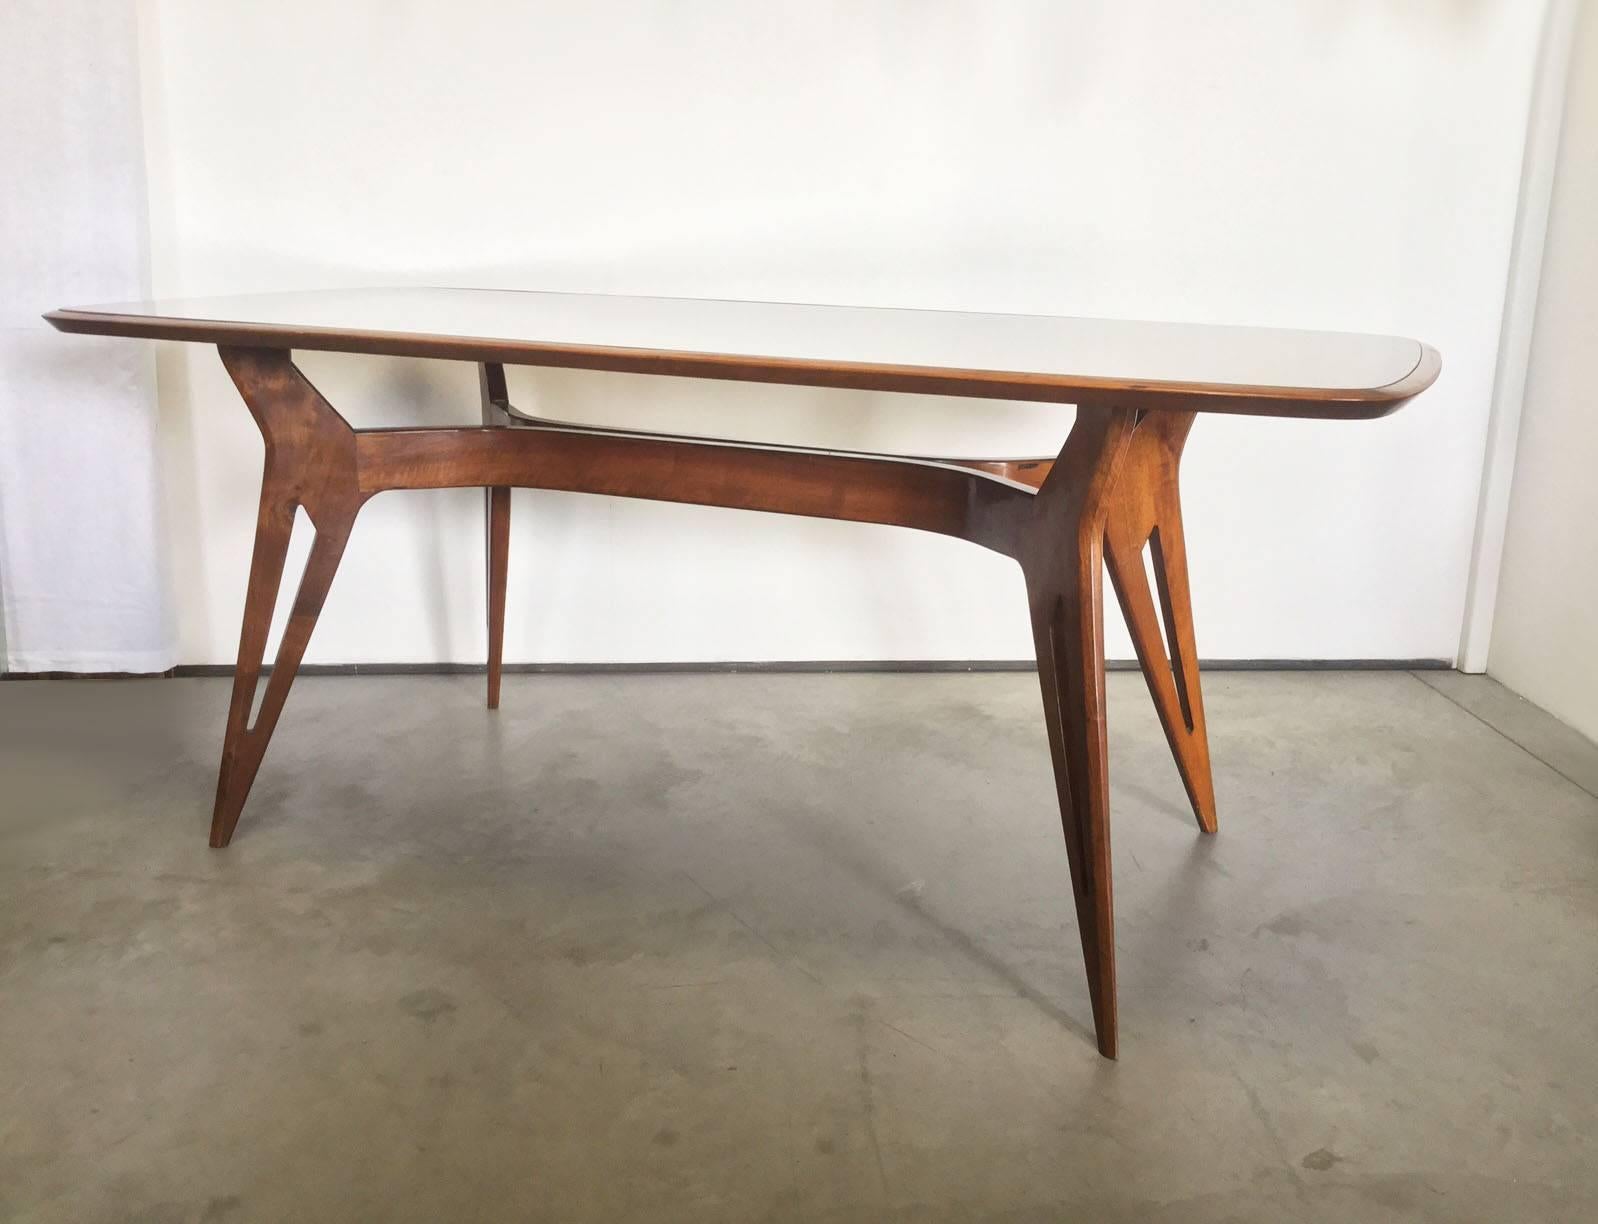 Beautiful dining table, sculptural base in walnut wood with four triangular legs linked by a crossing wood, gold opaline top.
Design attributed to Ico Parisi, 1950.